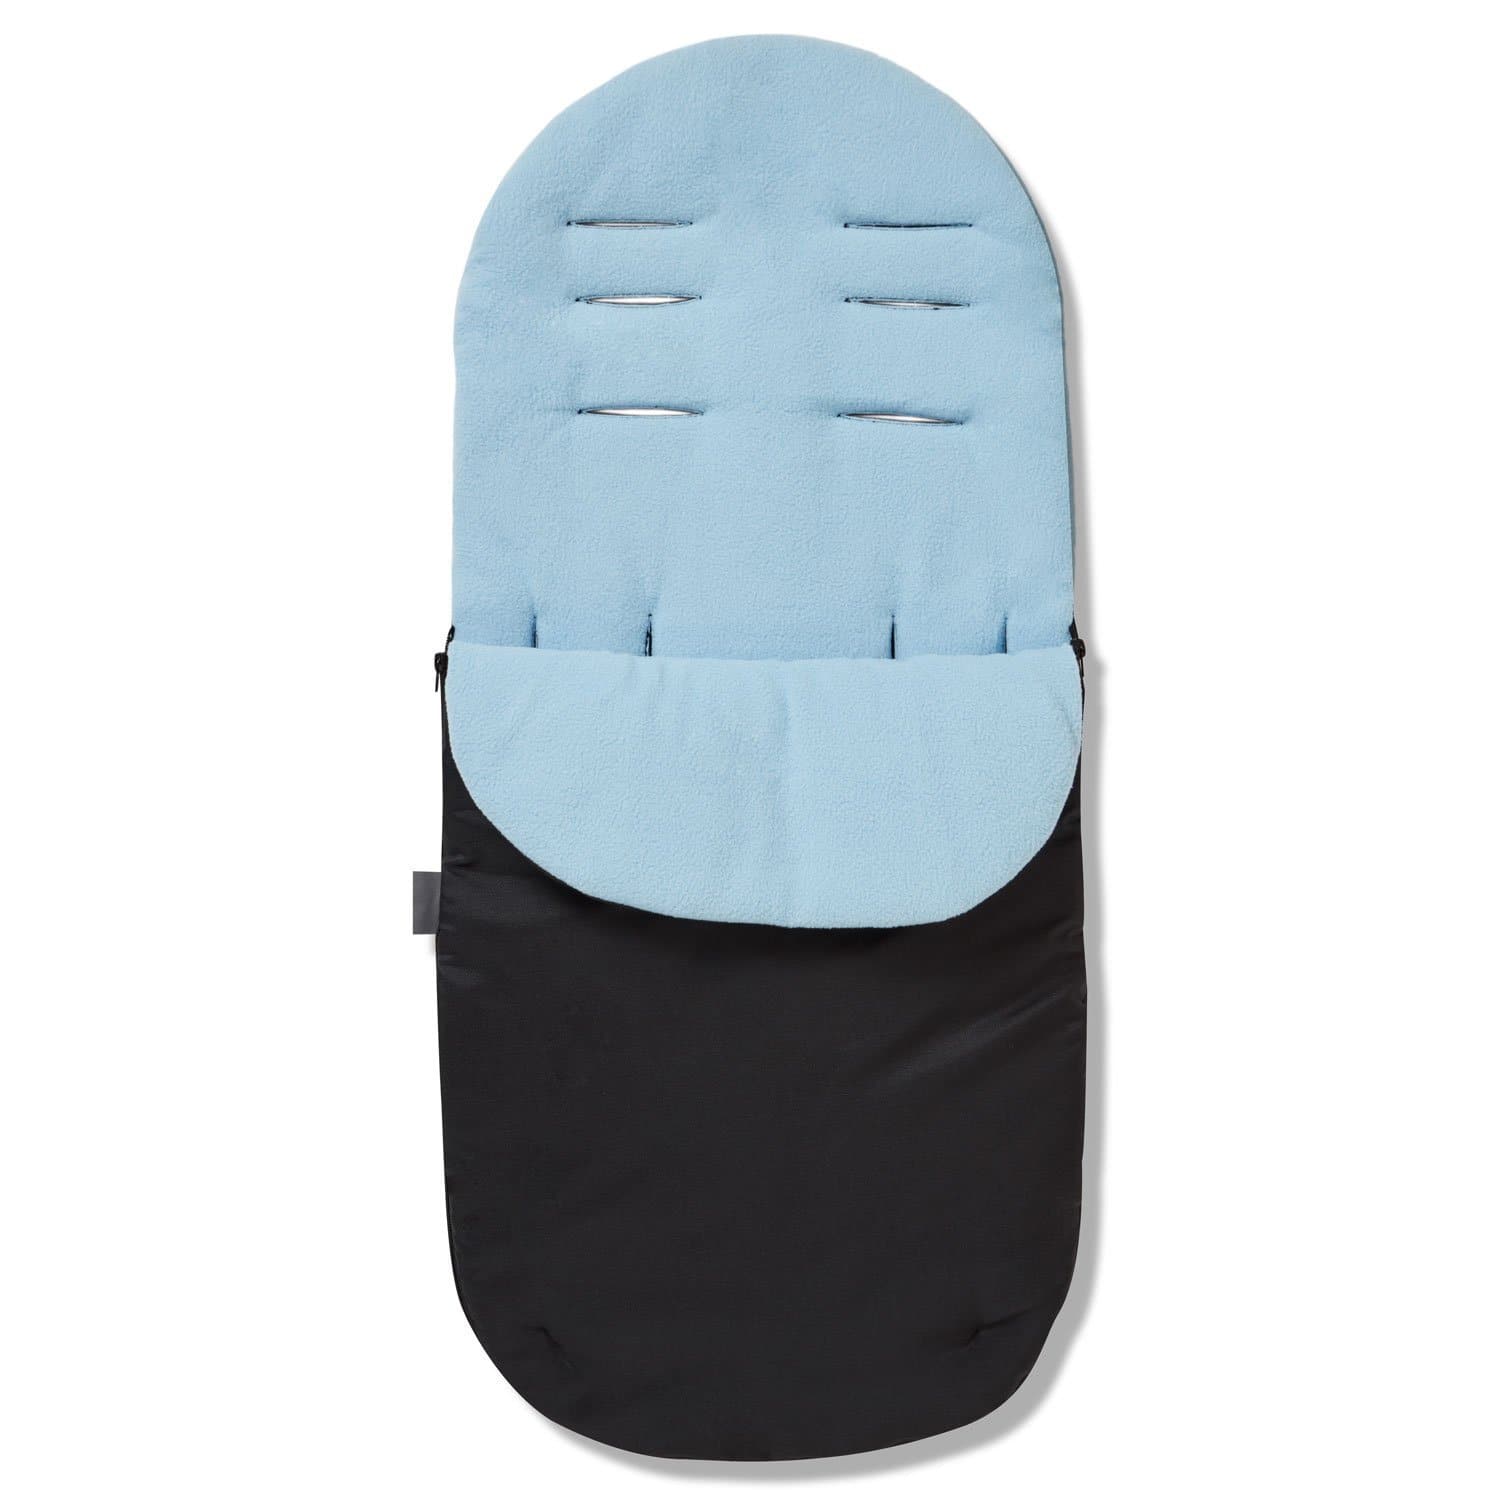 Footmuff / Cosy Toes Compatible with Seed - Light Blue / Fits All Models | For Your Little One